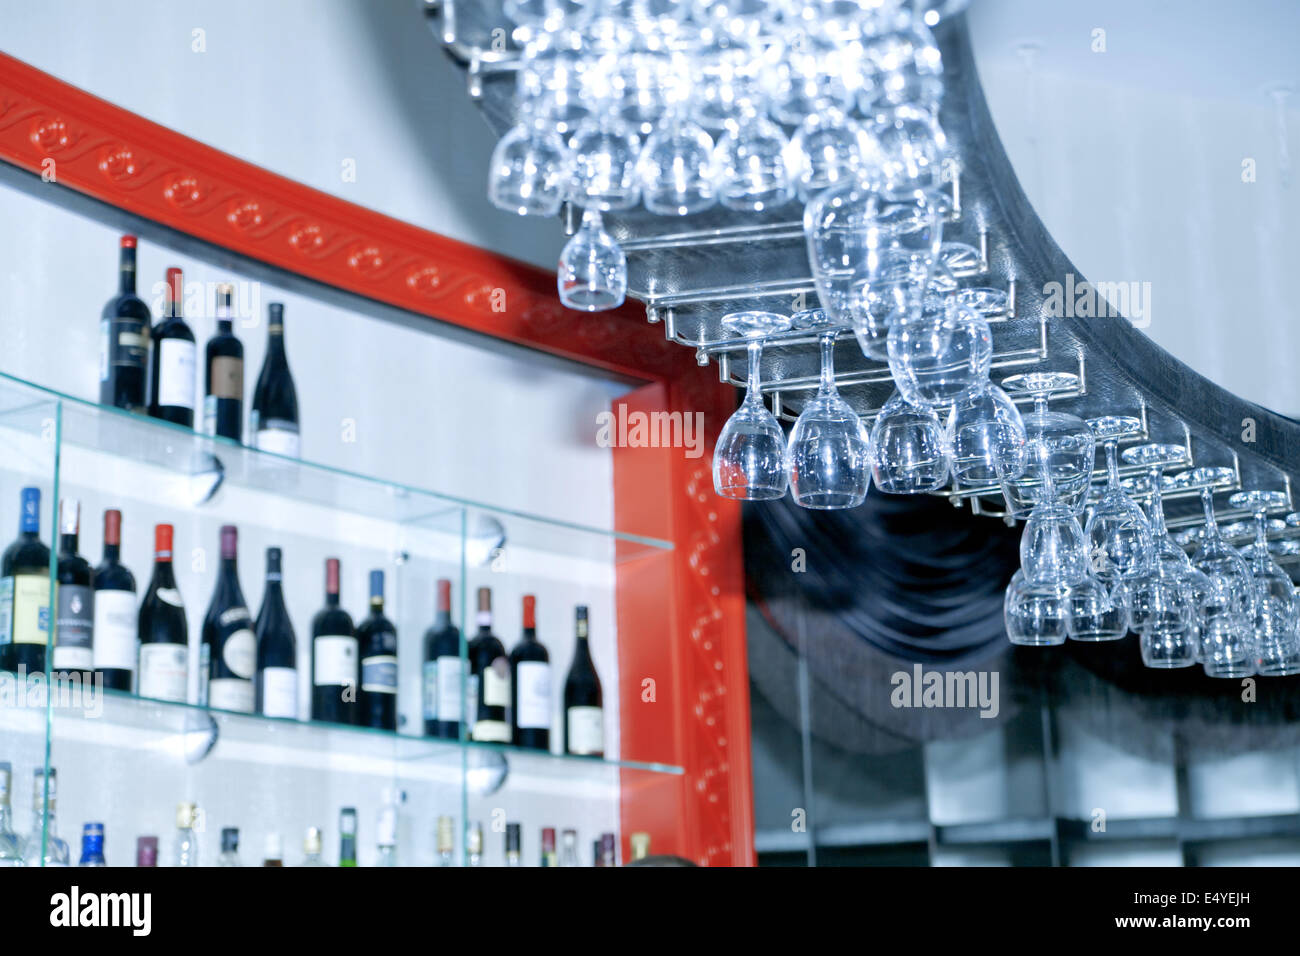 bar with drinks and glasses Stock Photo